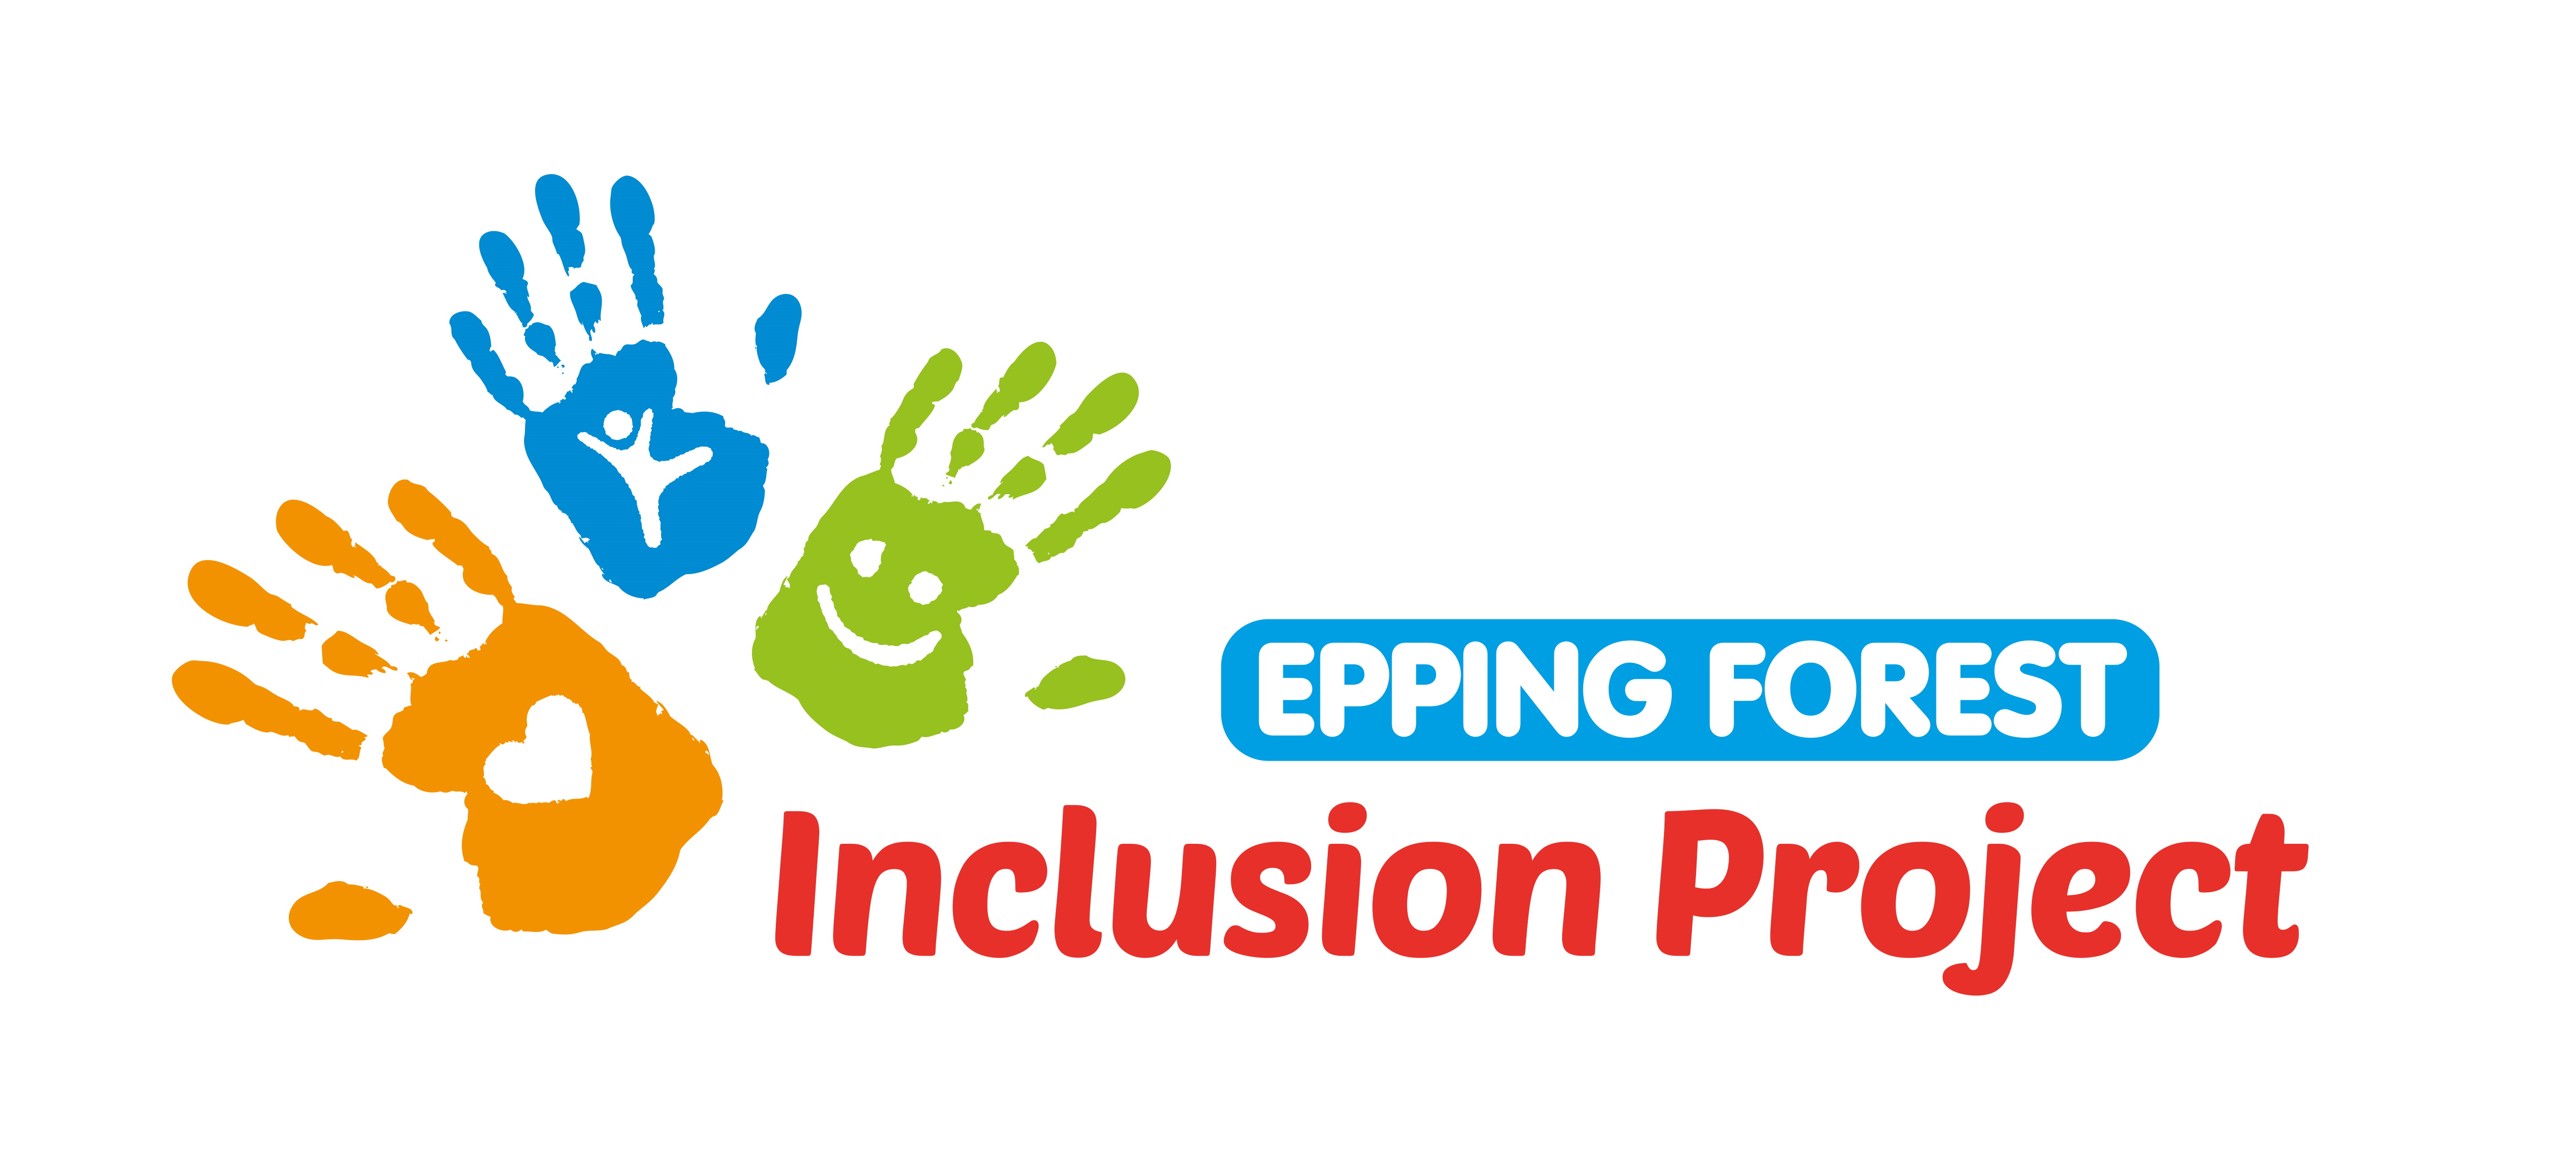 Epping Forest Inclusion Project